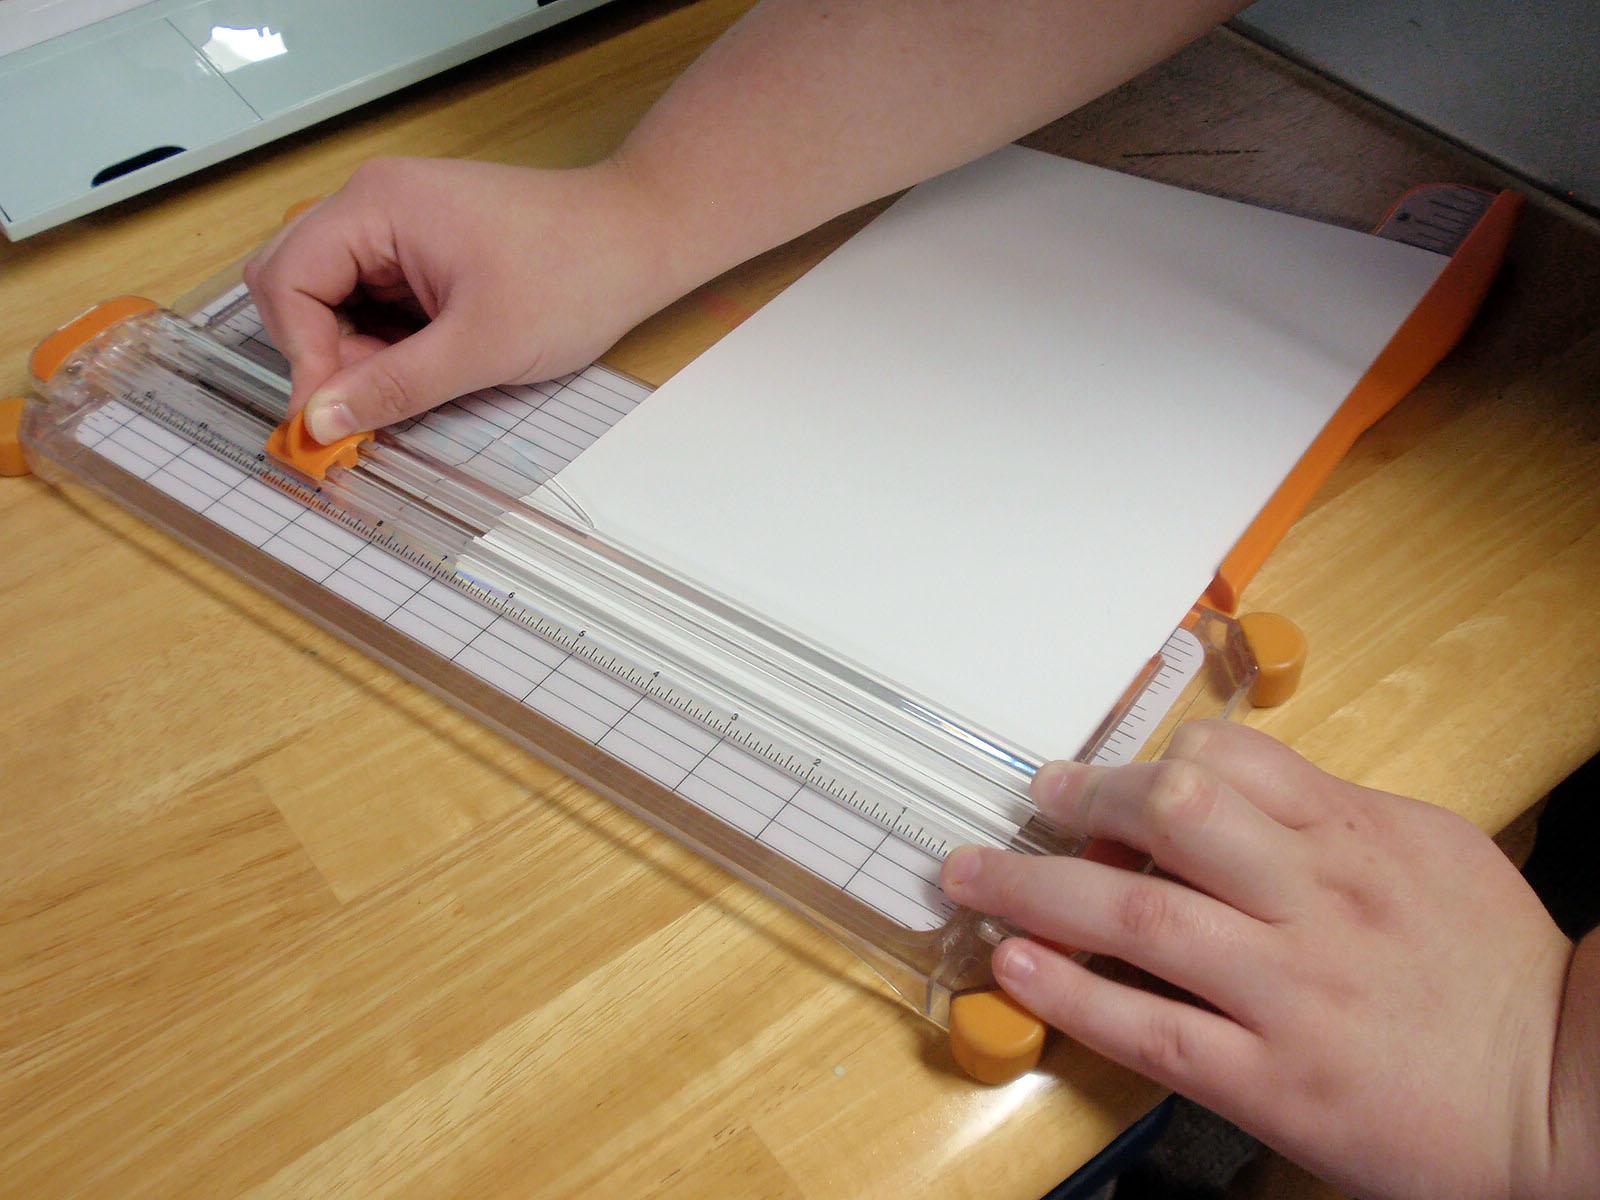 cut paper to size.jpg